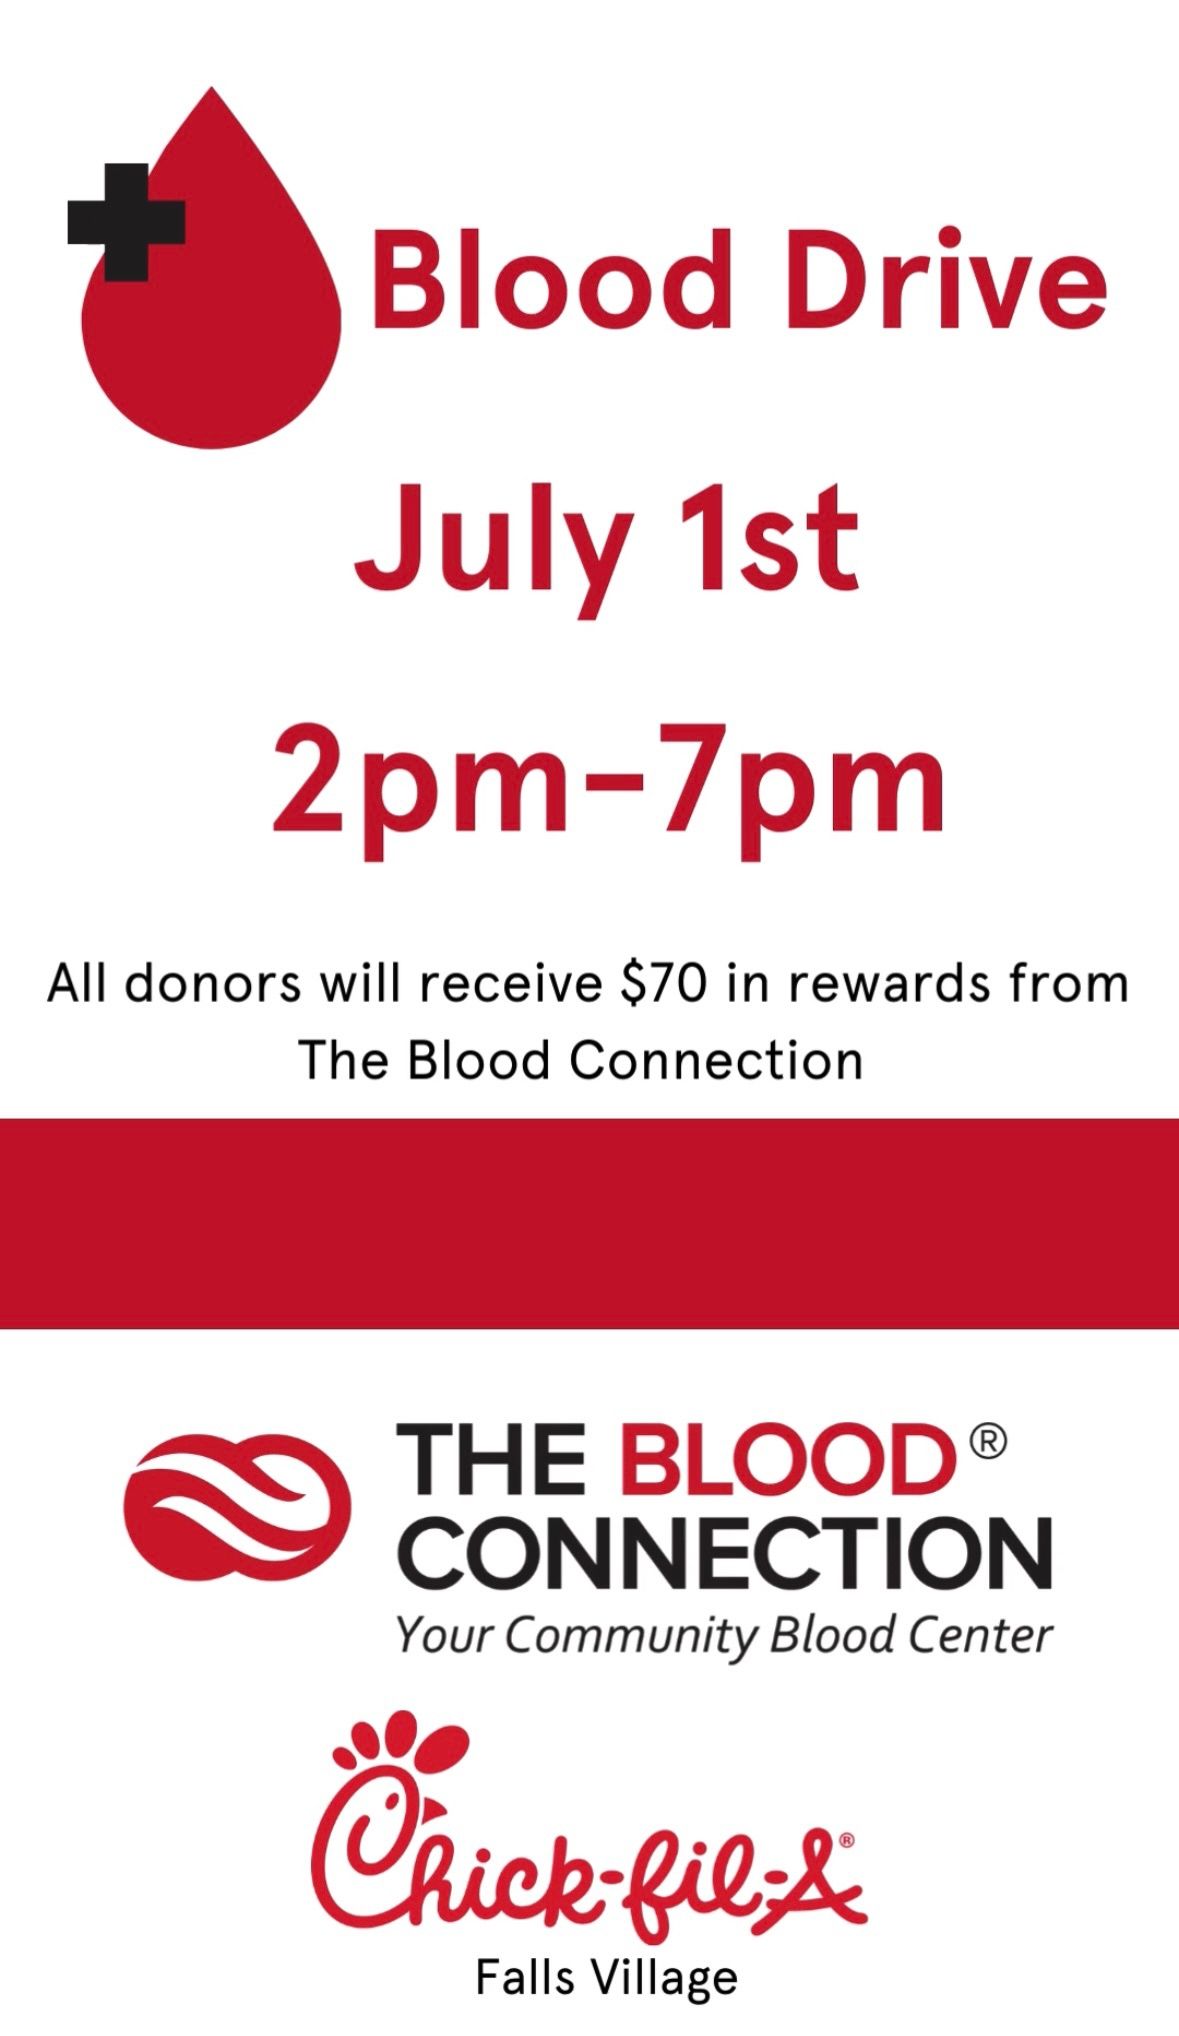 Blood Drive with The Blood Connection